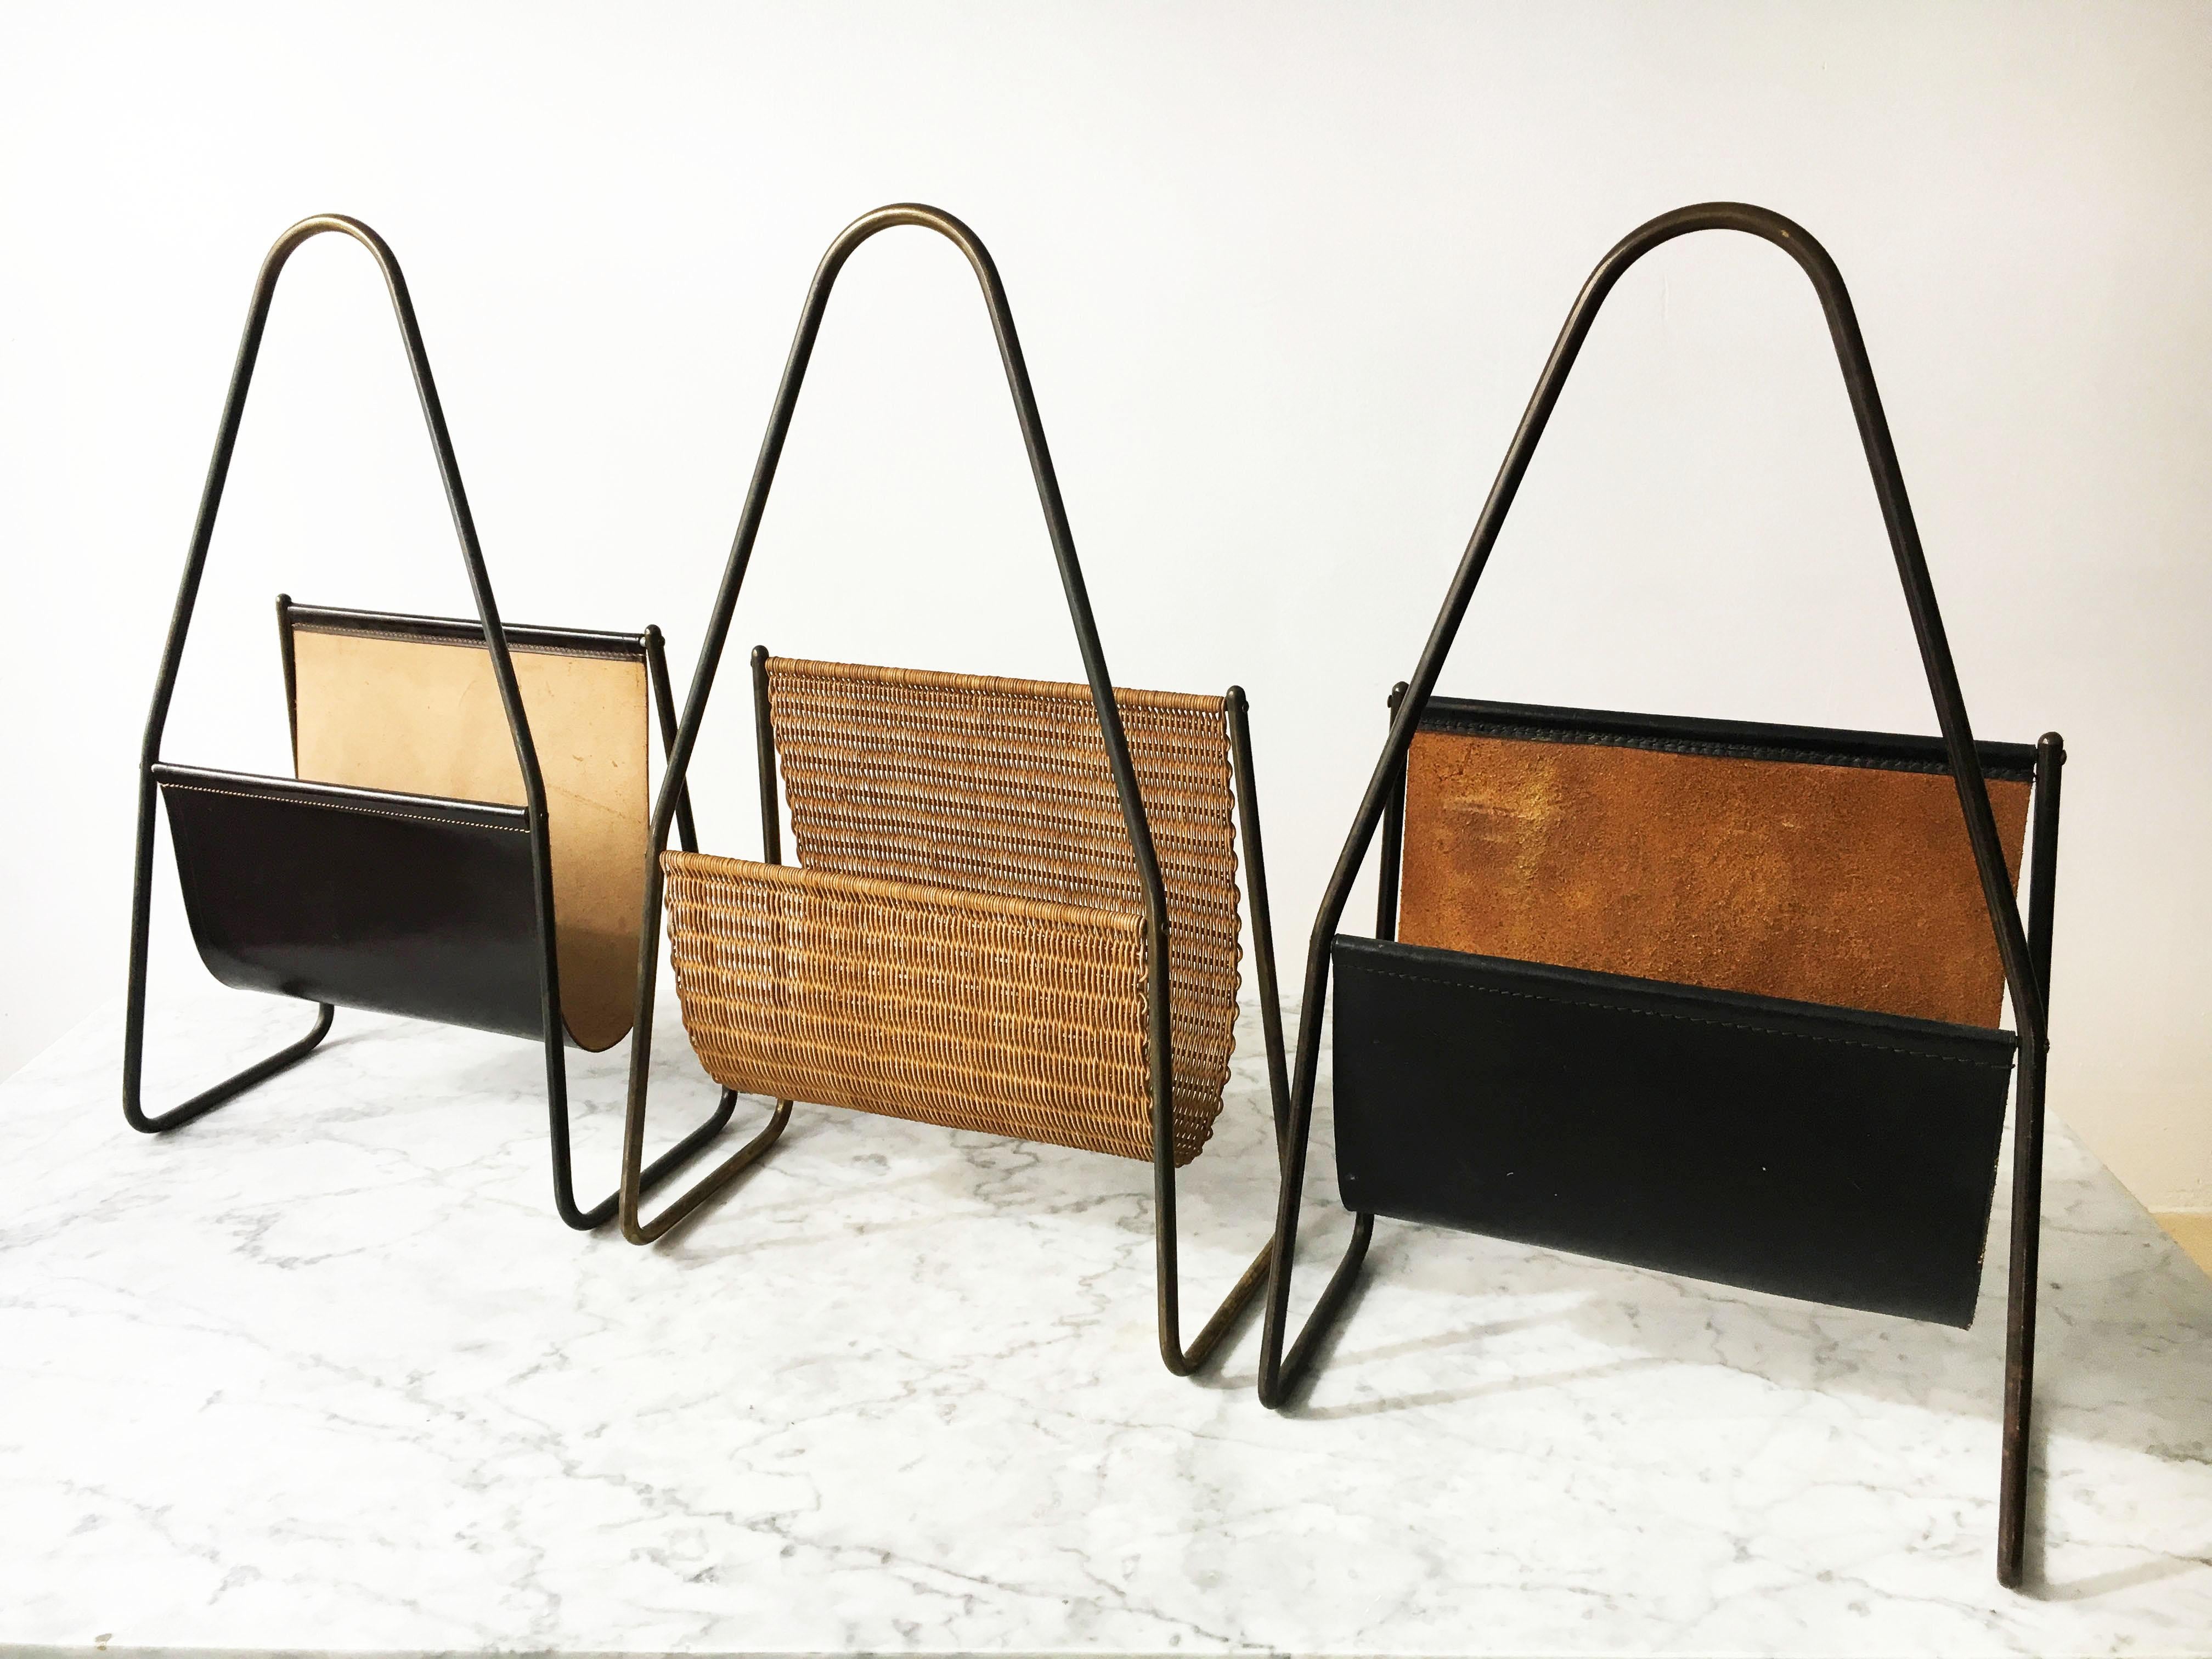 Carl Auböck II Vintage Magazine Stand Collection Group of Three, Austria, 1950s For Sale 6